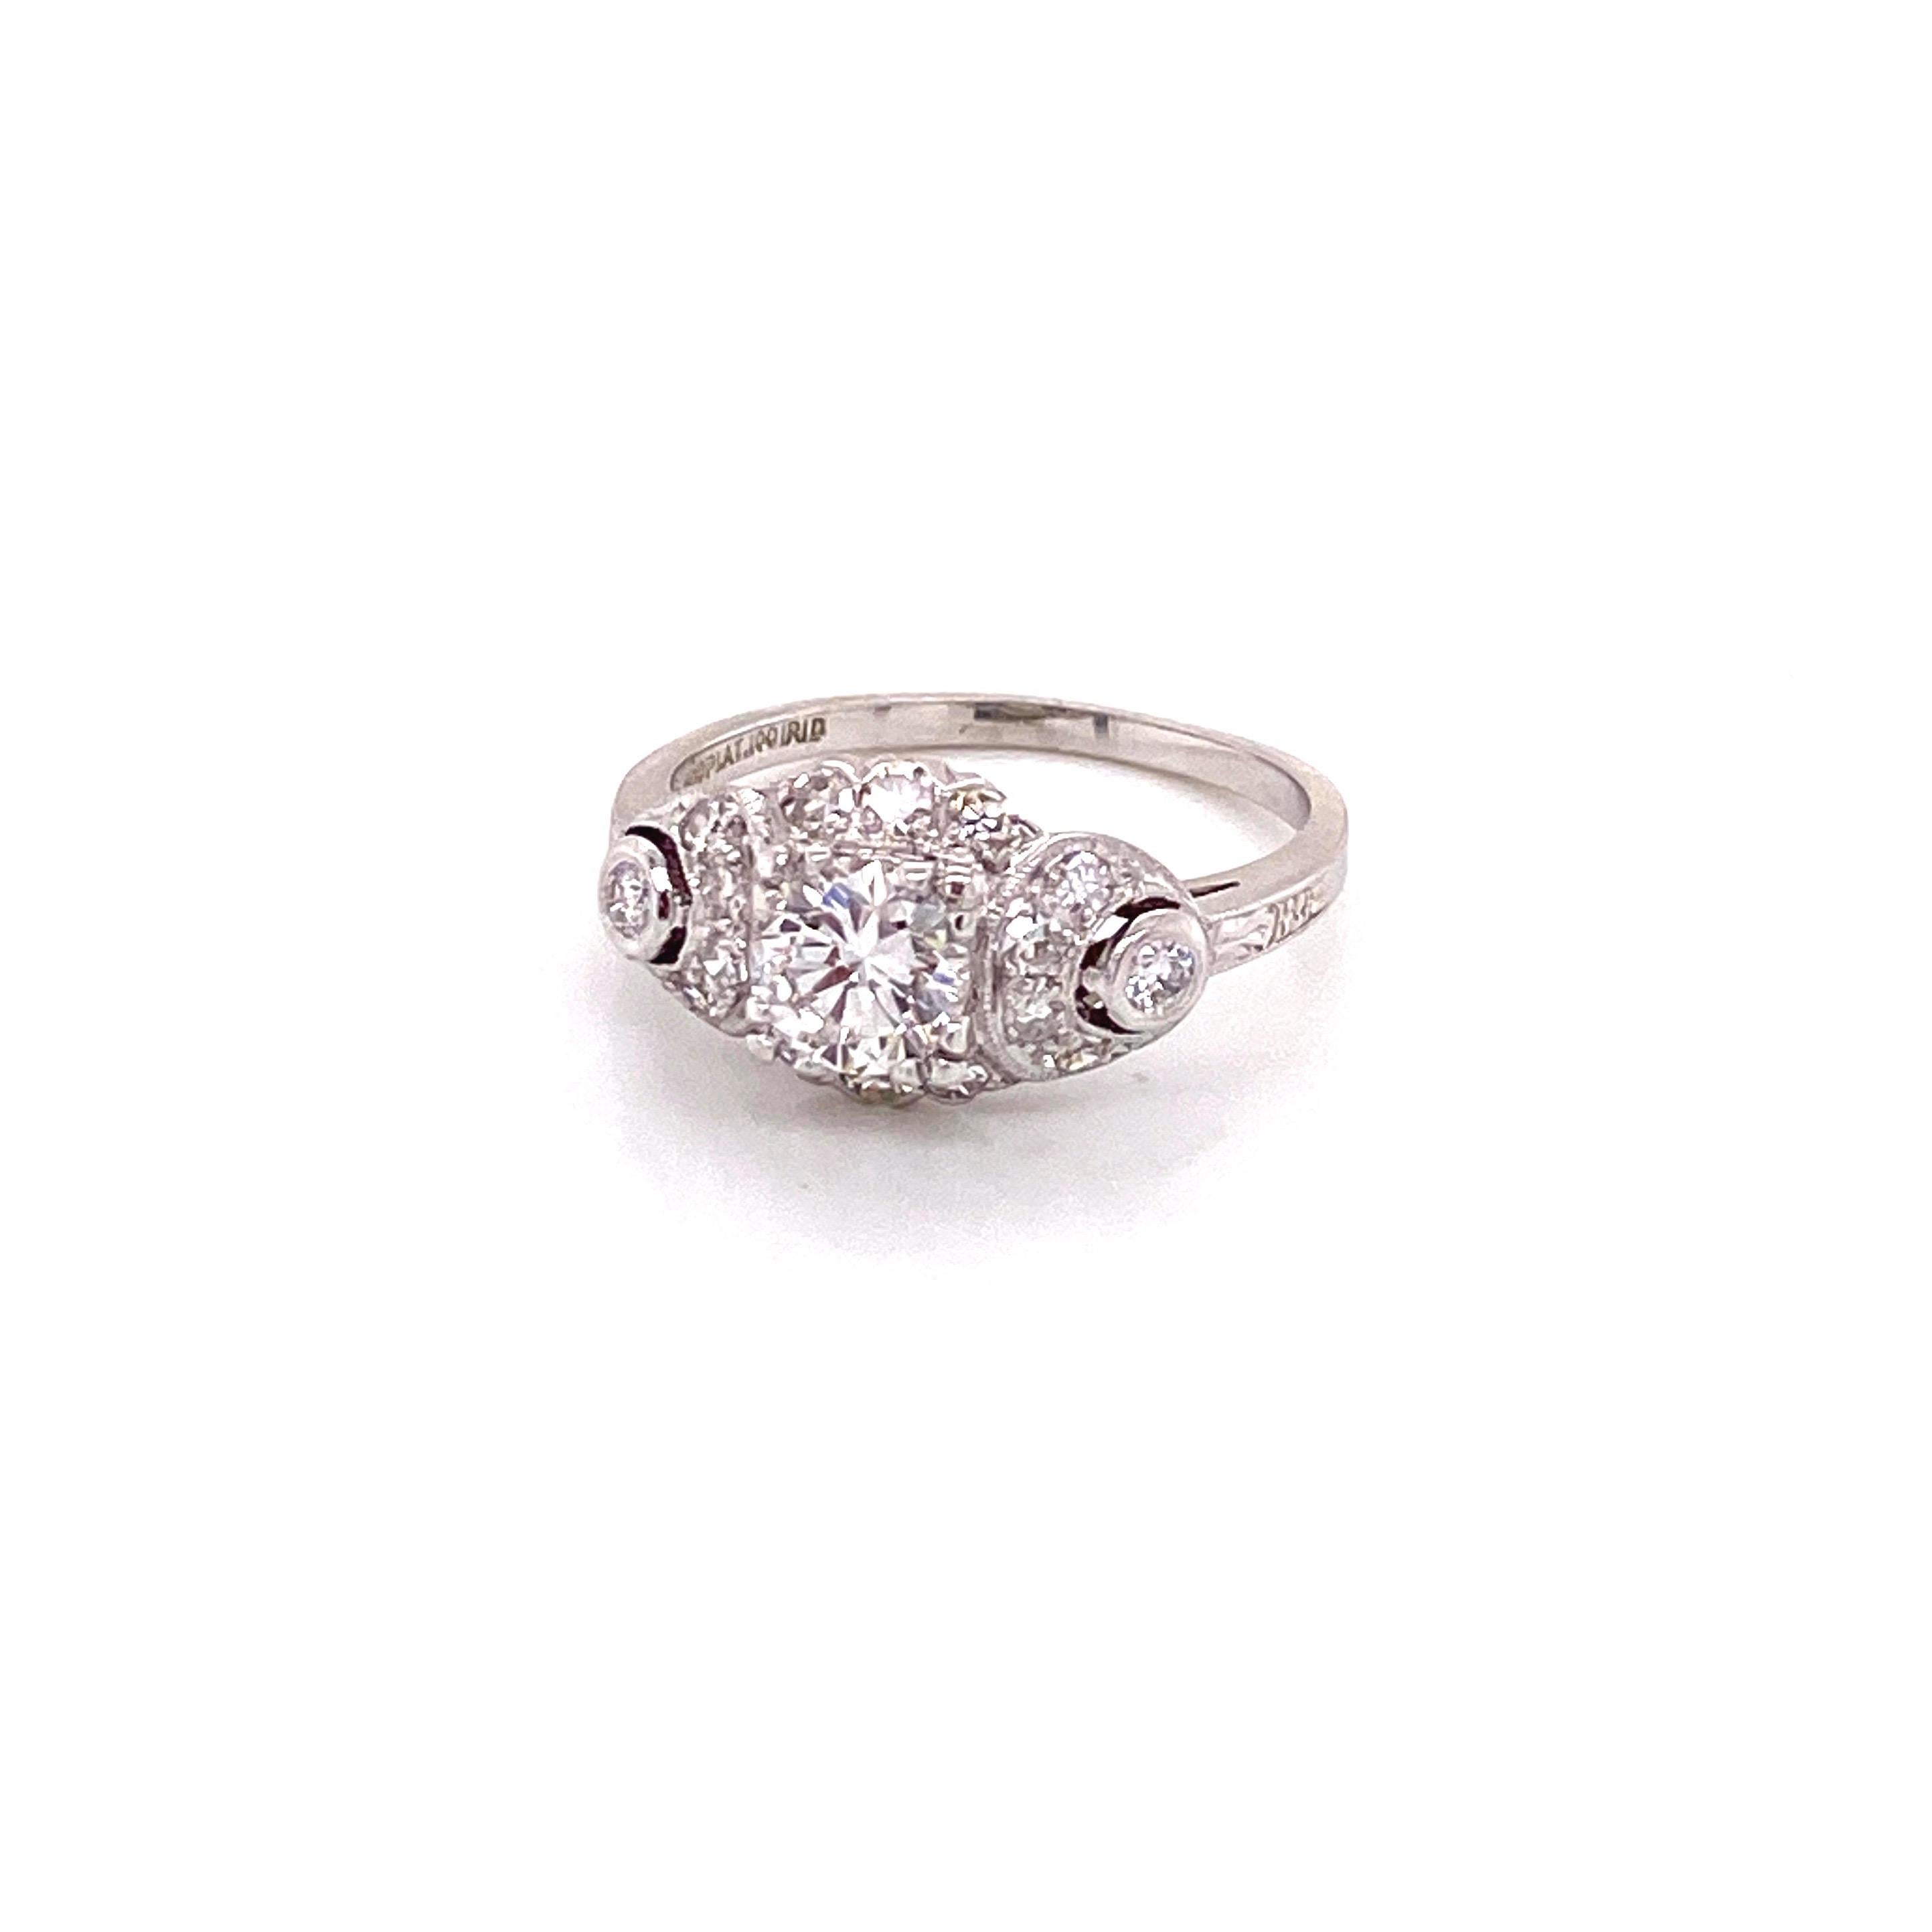 Vintage platinum Art Deco diamond ring with diamond crescents accents. The center round diamond weighs .63ct, and has G color, and VS2 clarity. The diamond is set low in a triple prong head with 3 single cut diamonds on top and bottom. Each crescent